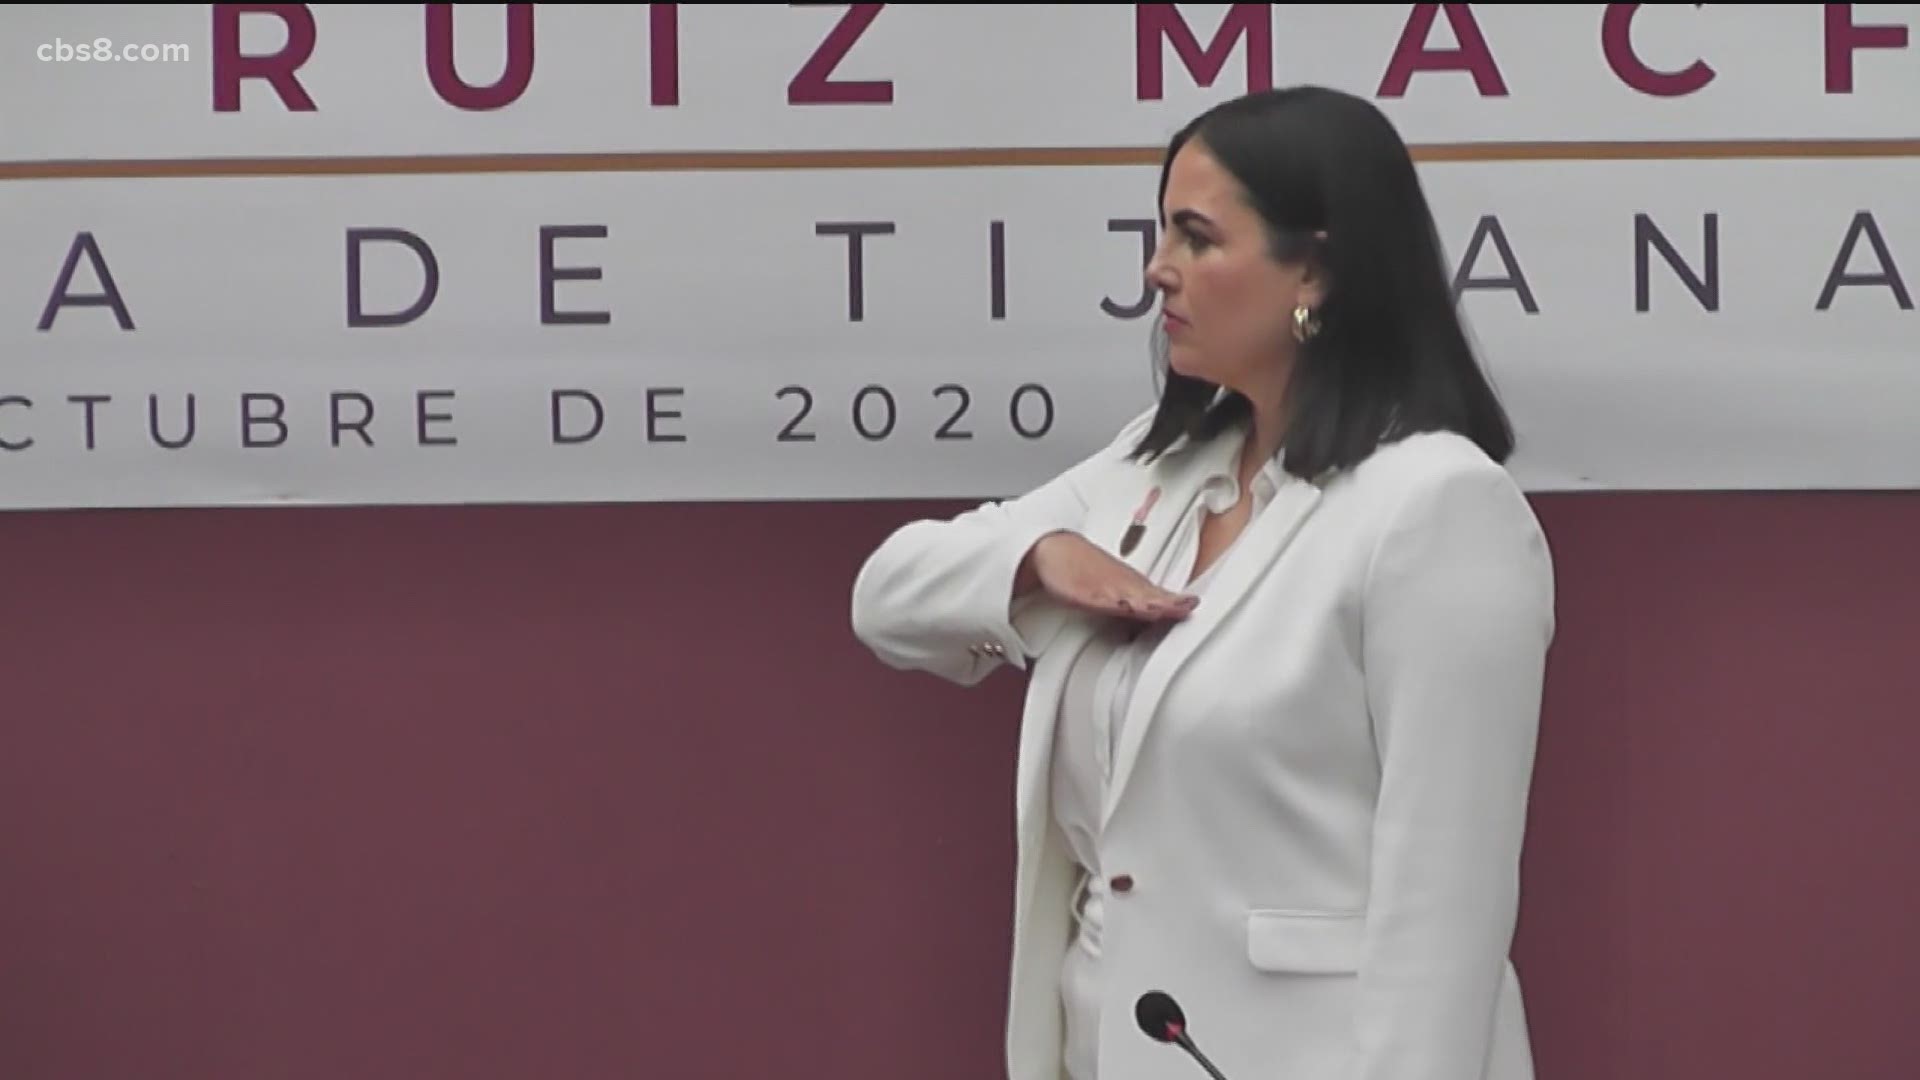 Karla Ruiz Macfarland, who's no stranger to politics, took office after the last mayor stepped down amid controversy and to run for governor of Baja California.